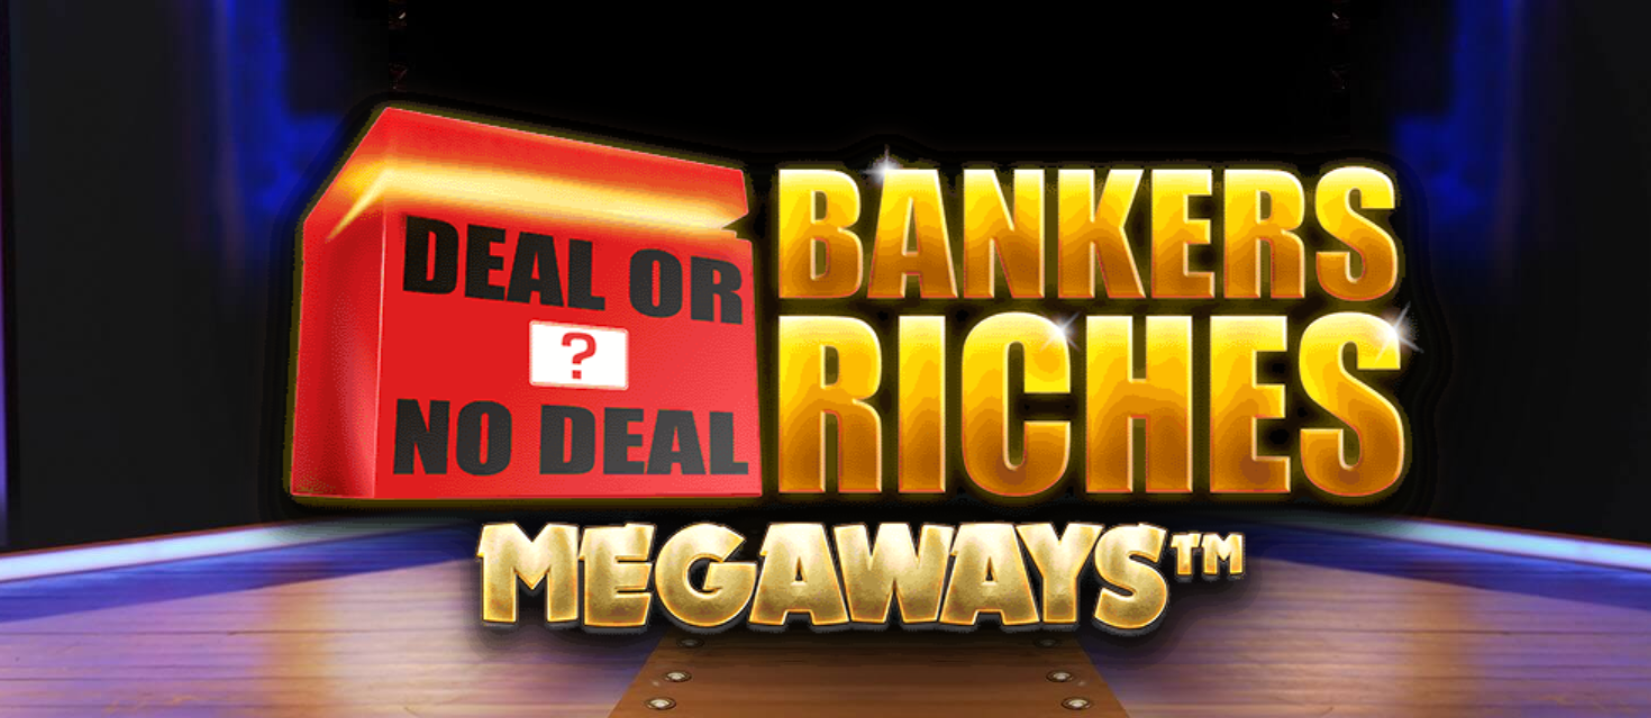 Deal or no deal bankers riches megaways slot logo